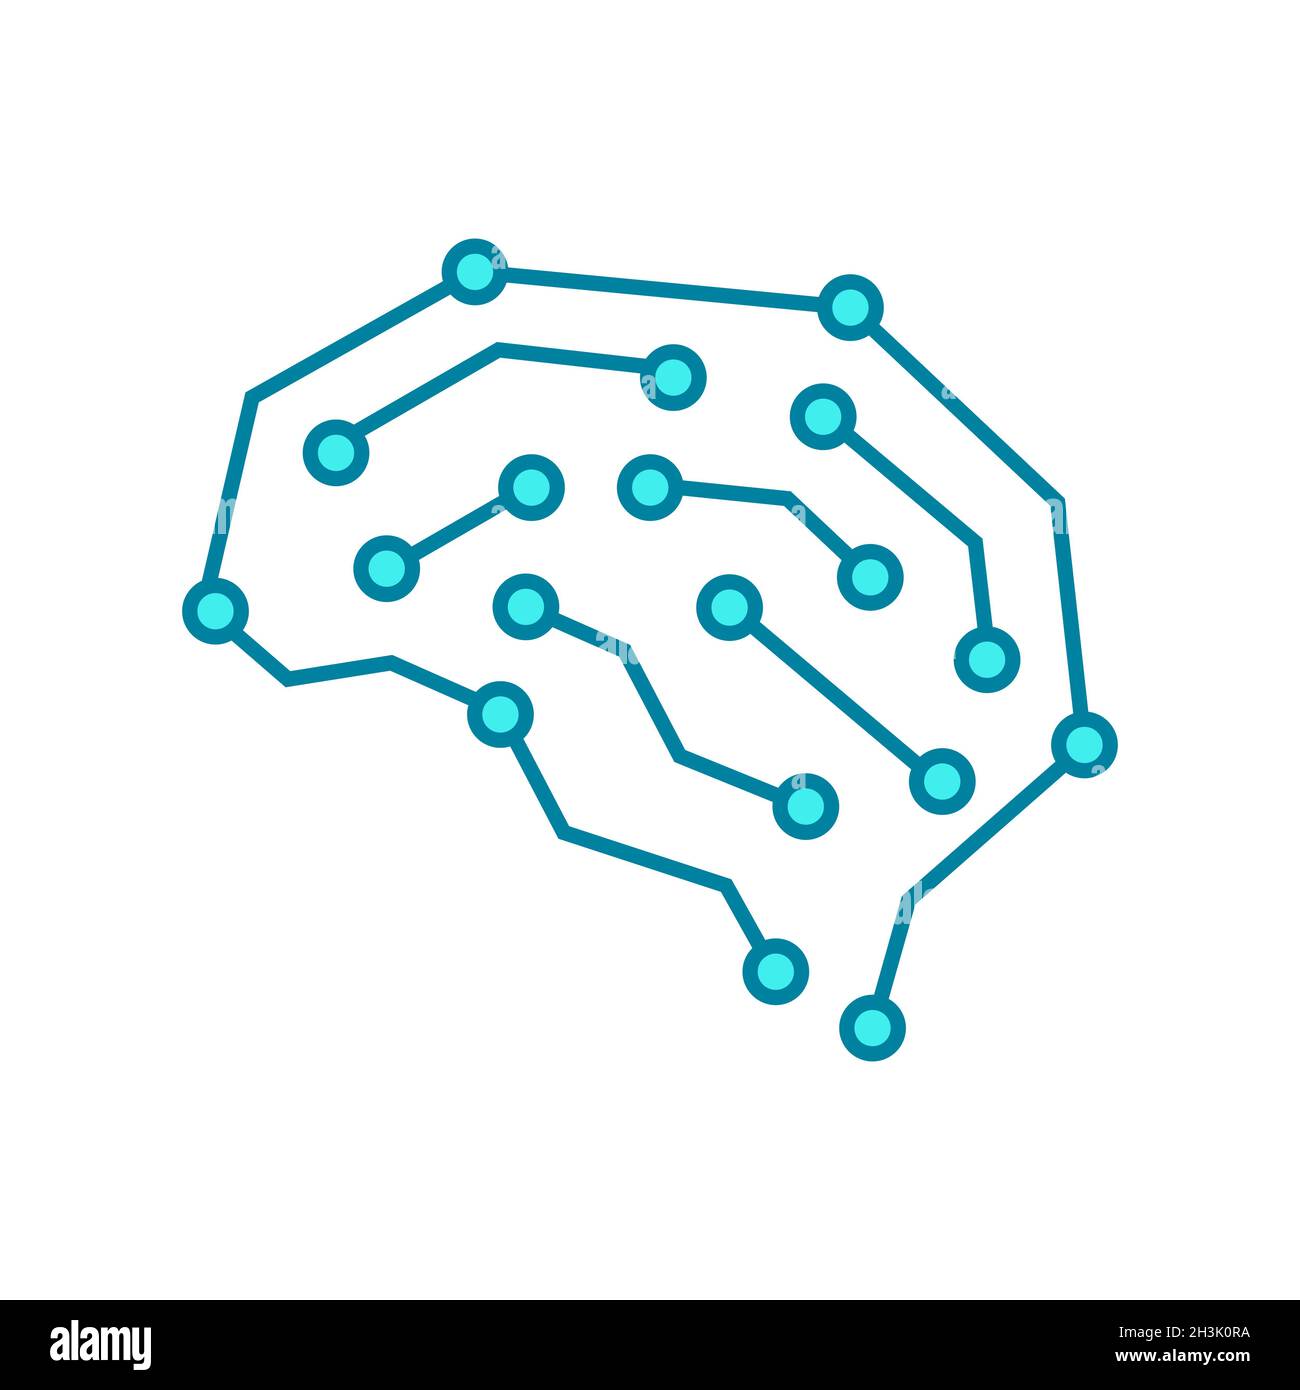 Brain AI concept. Machine learning and artificial intelligence. Neural network. Neuroscience synapses. Futuristic cyborg robot idea. Blue dots. Vector Stock Vector